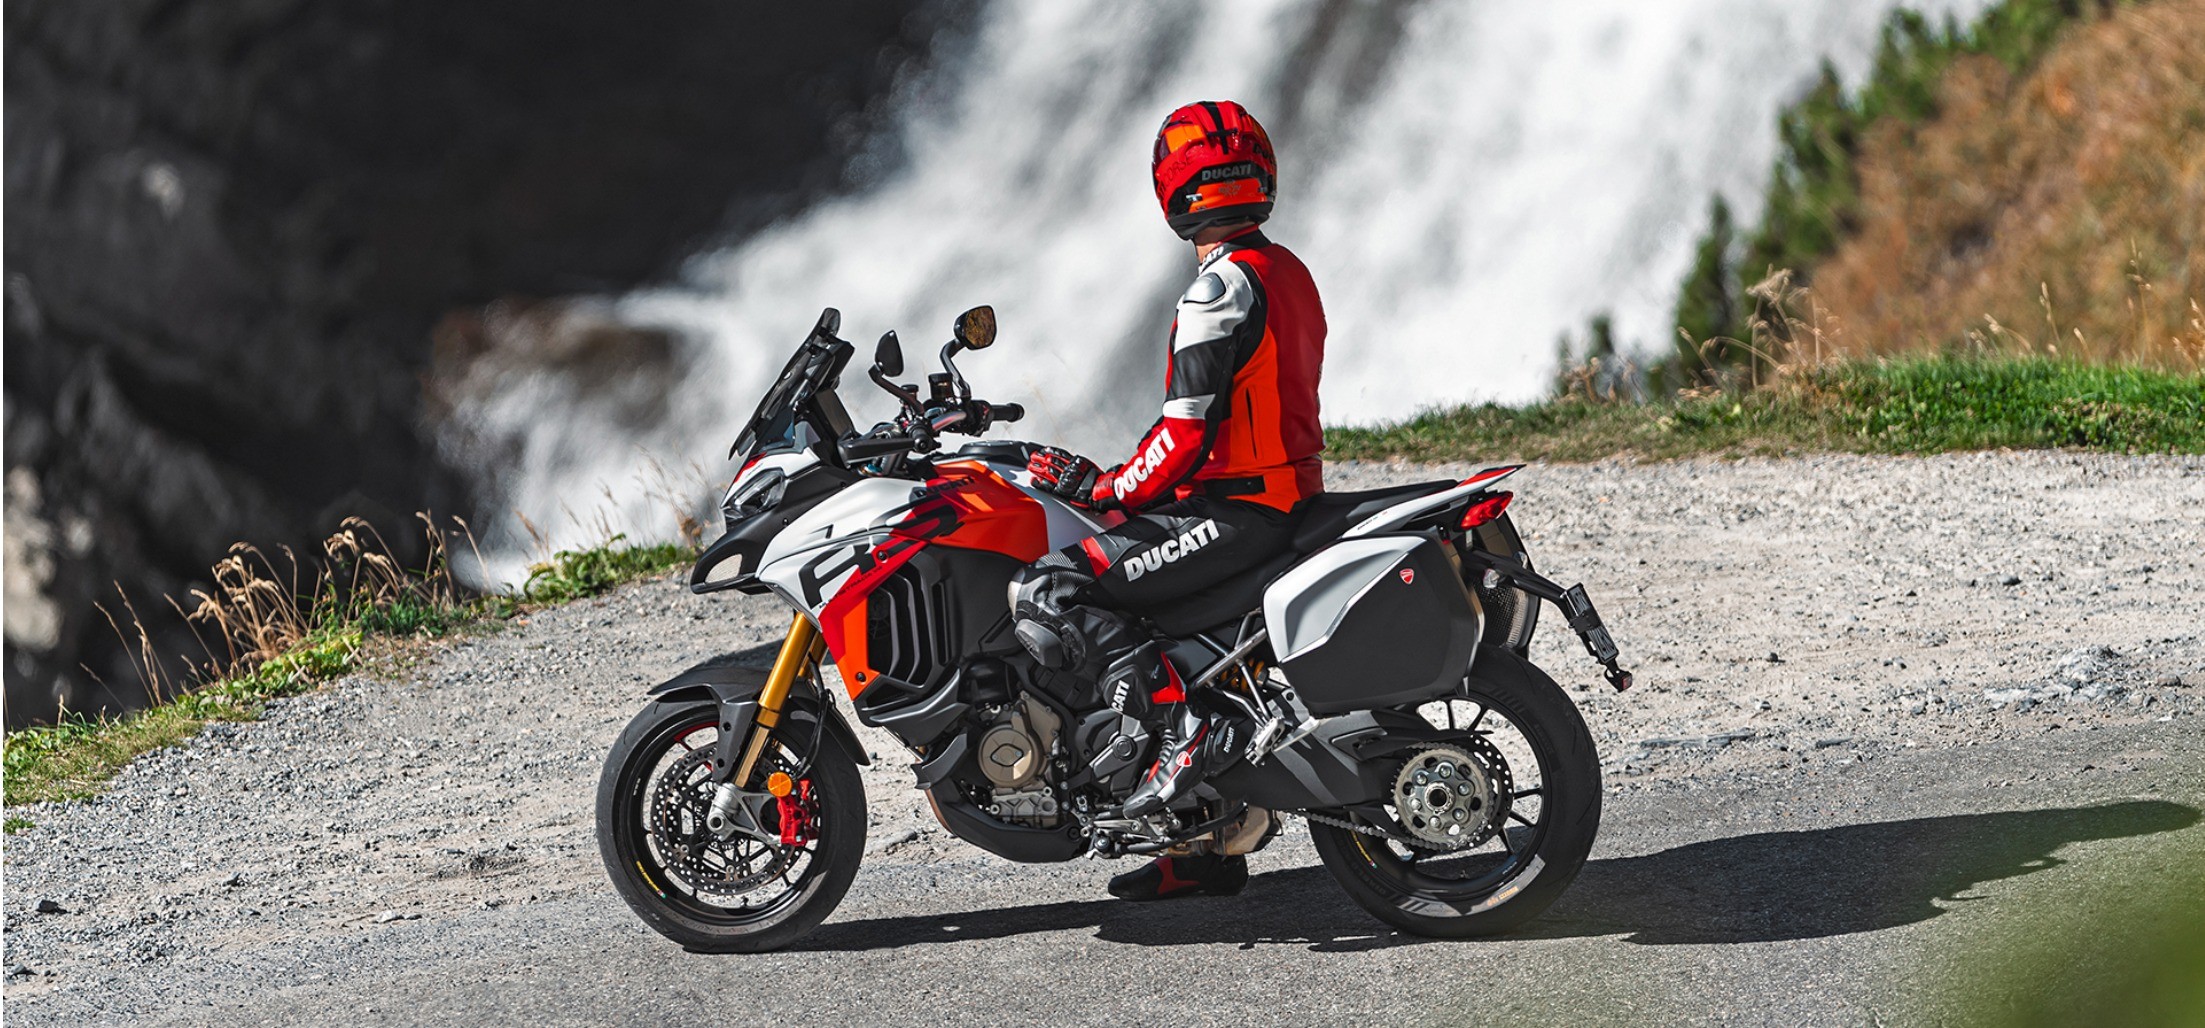 Ducati Multistrada V4 RS, when Superbike meets touring